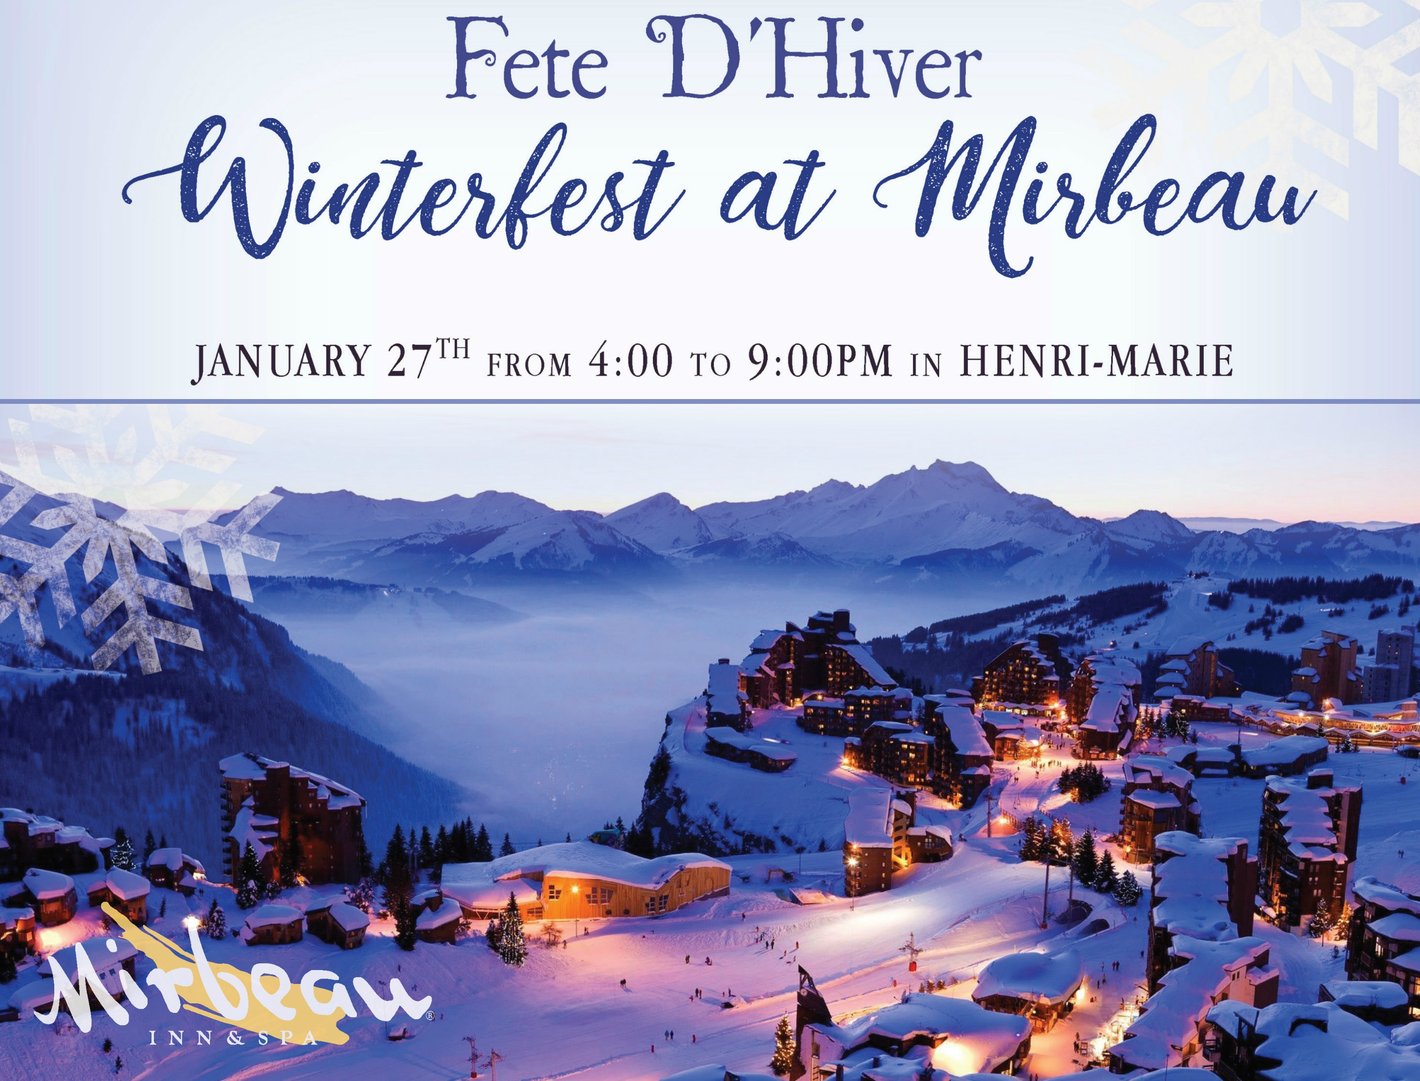 Mirbeau Inn and Spa at The Pinehills’  Fete D’Hiver-Winterfest - 1.27.18